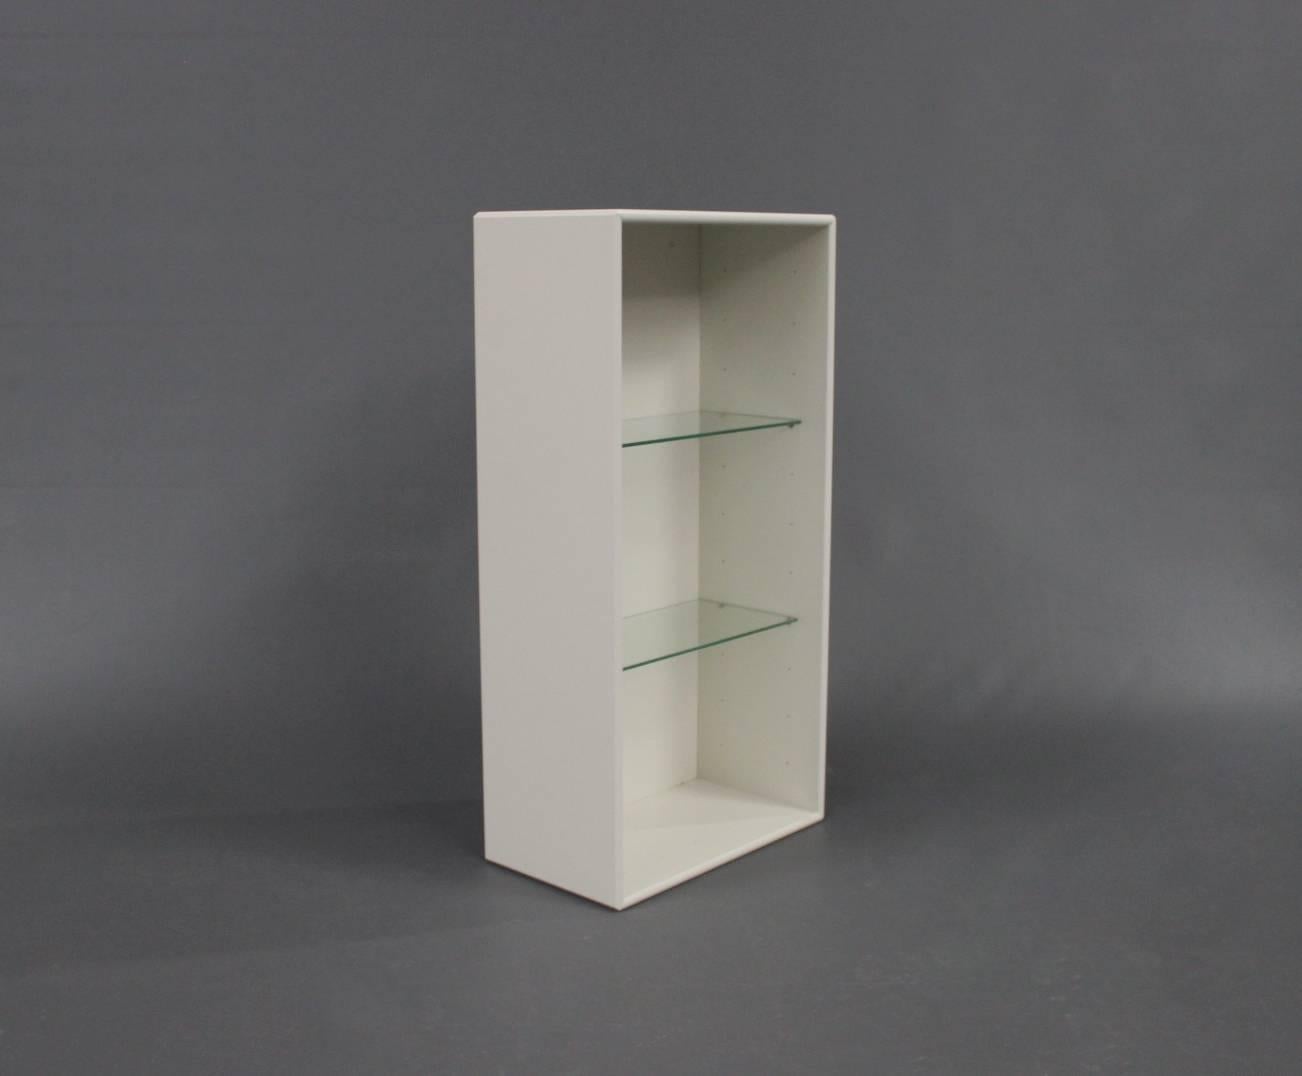 A pair of white bookcases by Montana with glass shelves.